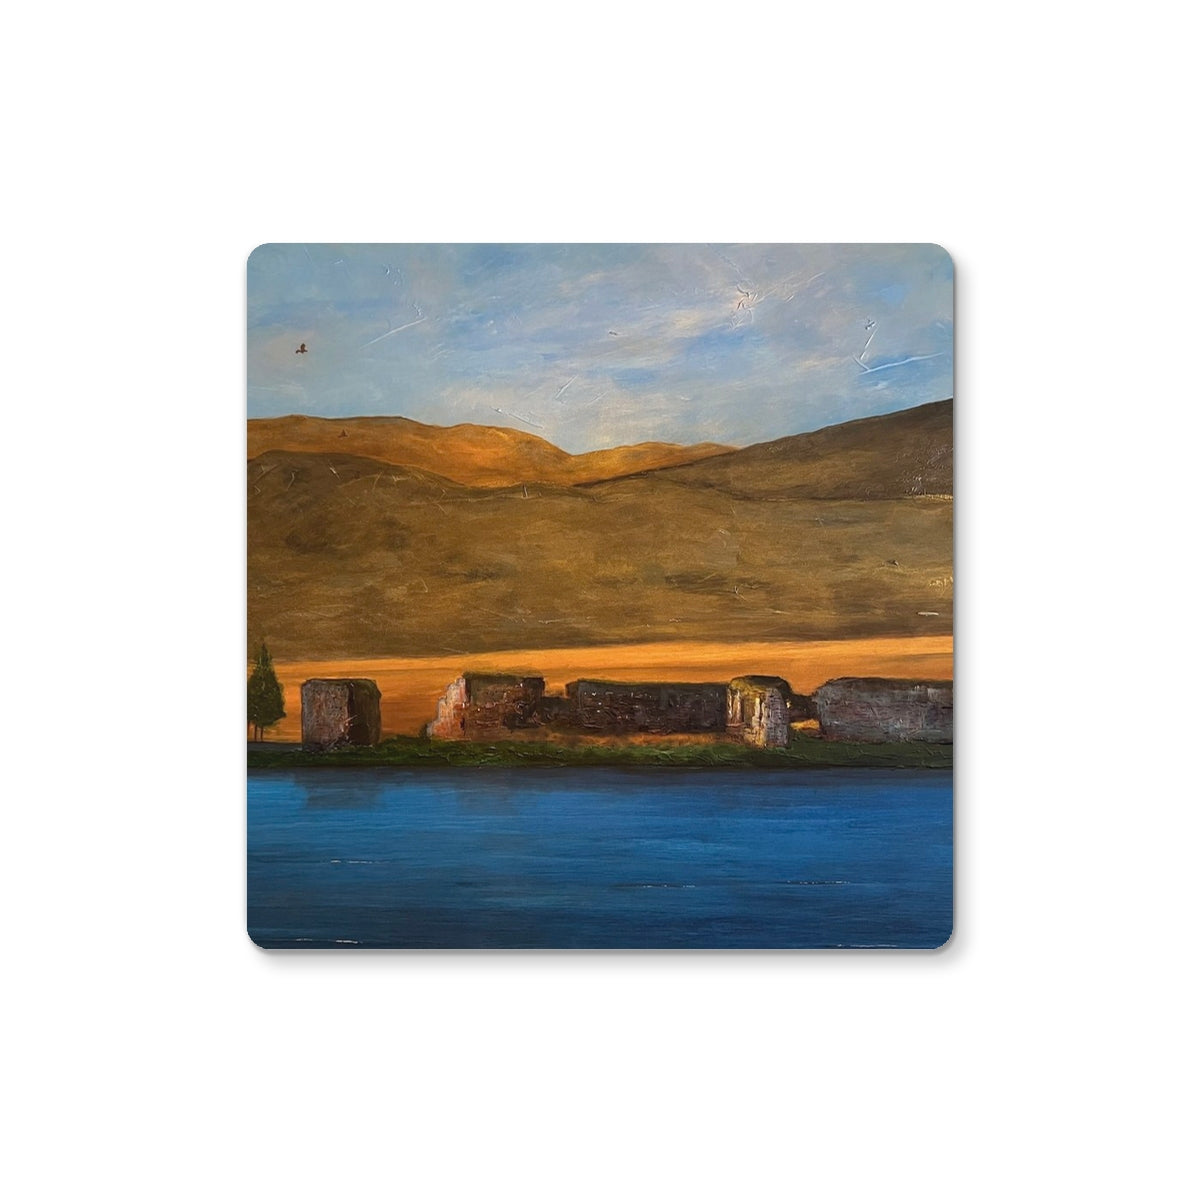 Lochindorb Castle Art Gifts Coaster-Coasters-Scottish Lochs & Mountains Art Gallery-2 Coasters-Paintings, Prints, Homeware, Art Gifts From Scotland By Scottish Artist Kevin Hunter